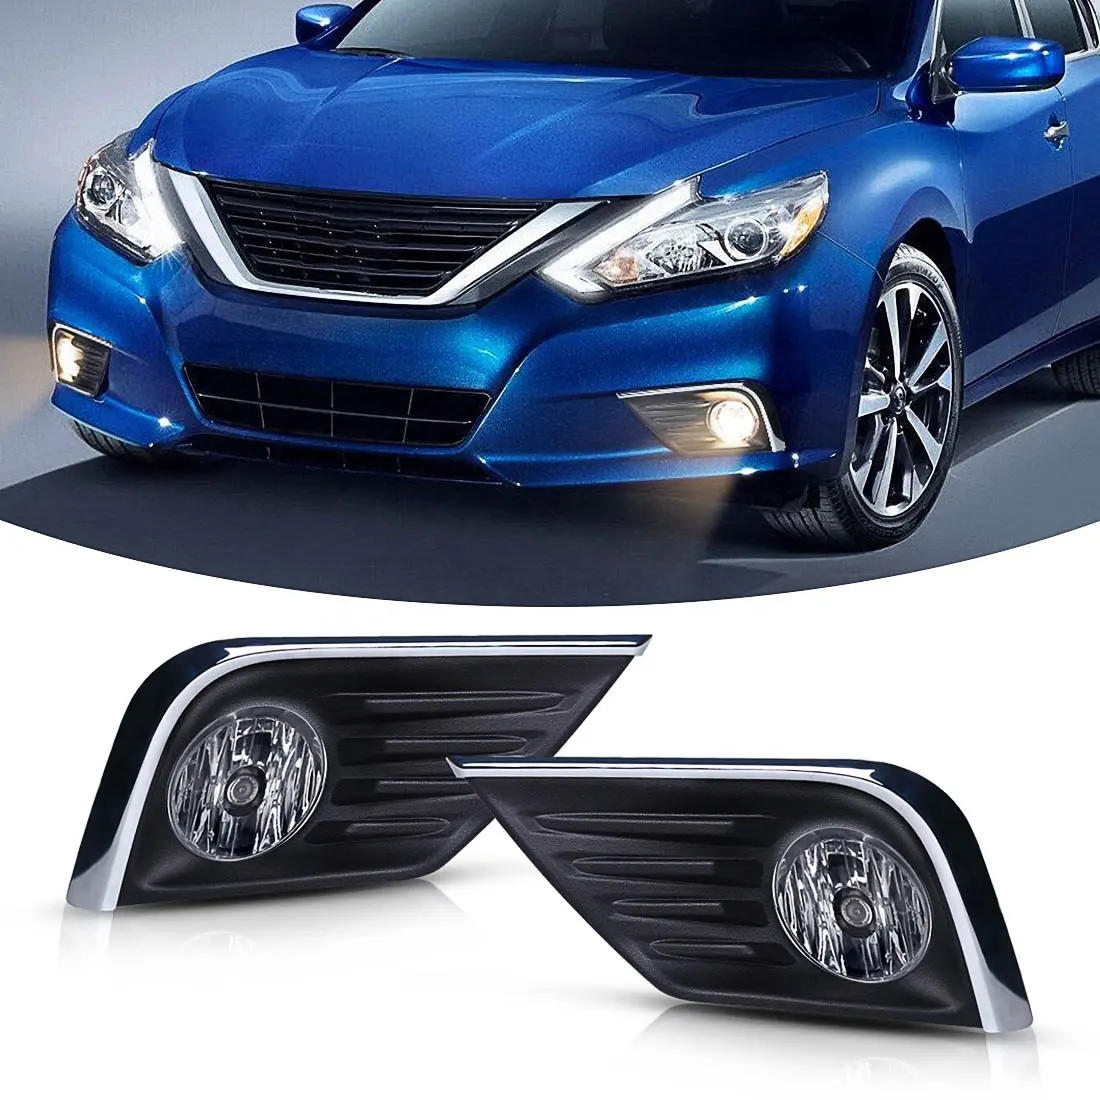 New Product Best Seller Fog Lamps Front Bumper Car Auto Driving Lamp Fog Light for Nissan Altima 2016 2017 2018 Auto Accessories